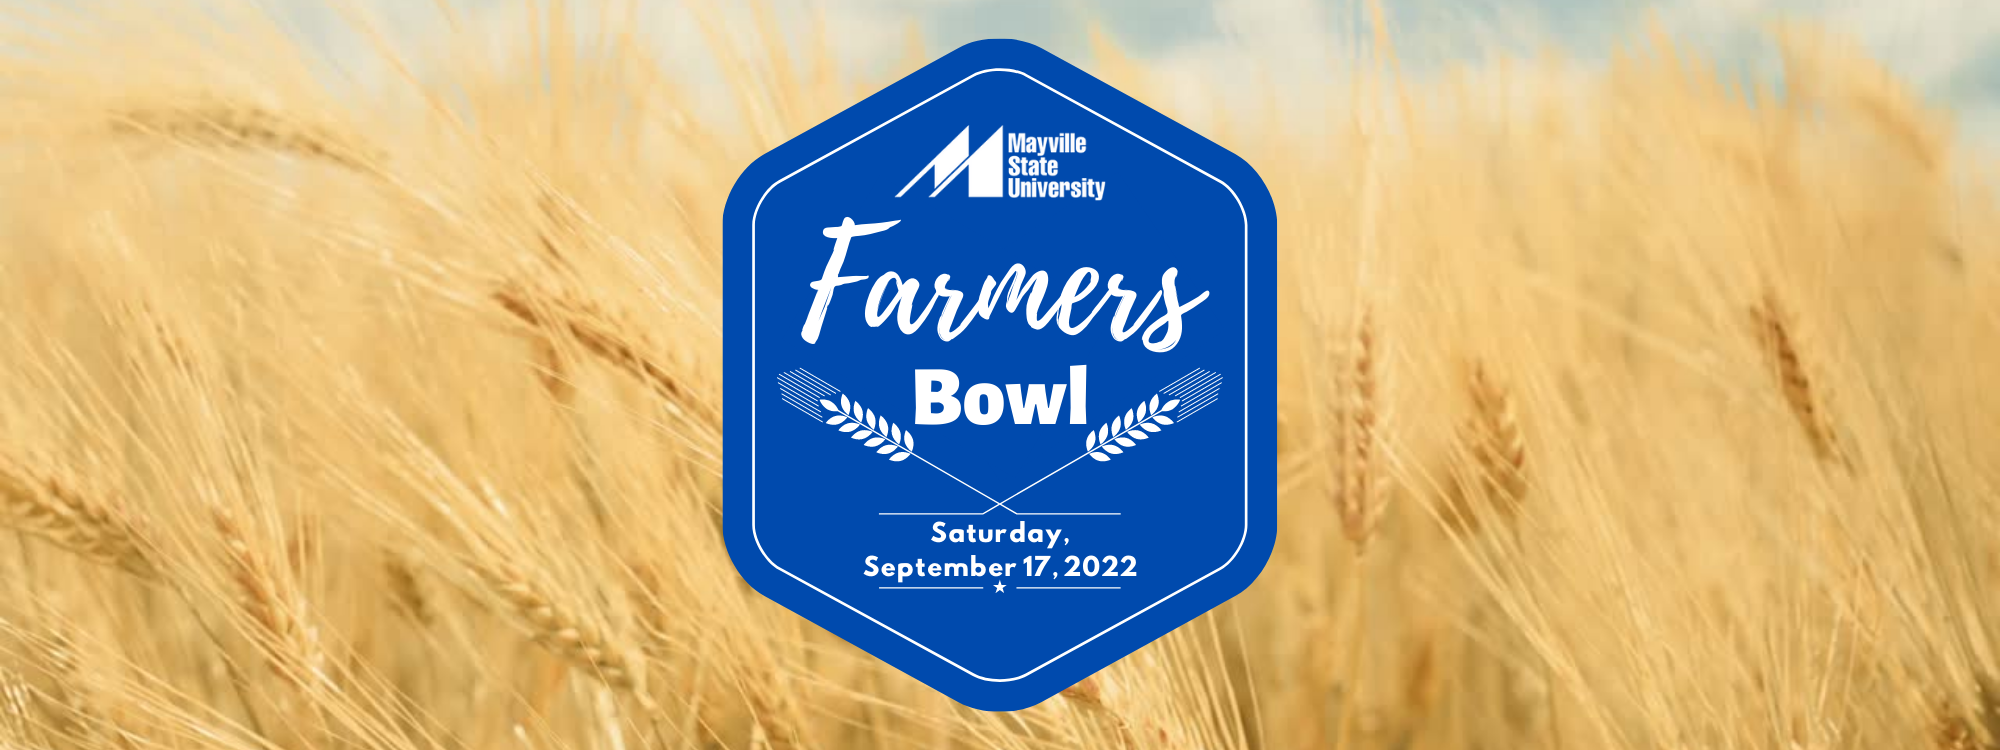 Farmers Bowl 2022 web graphic.png